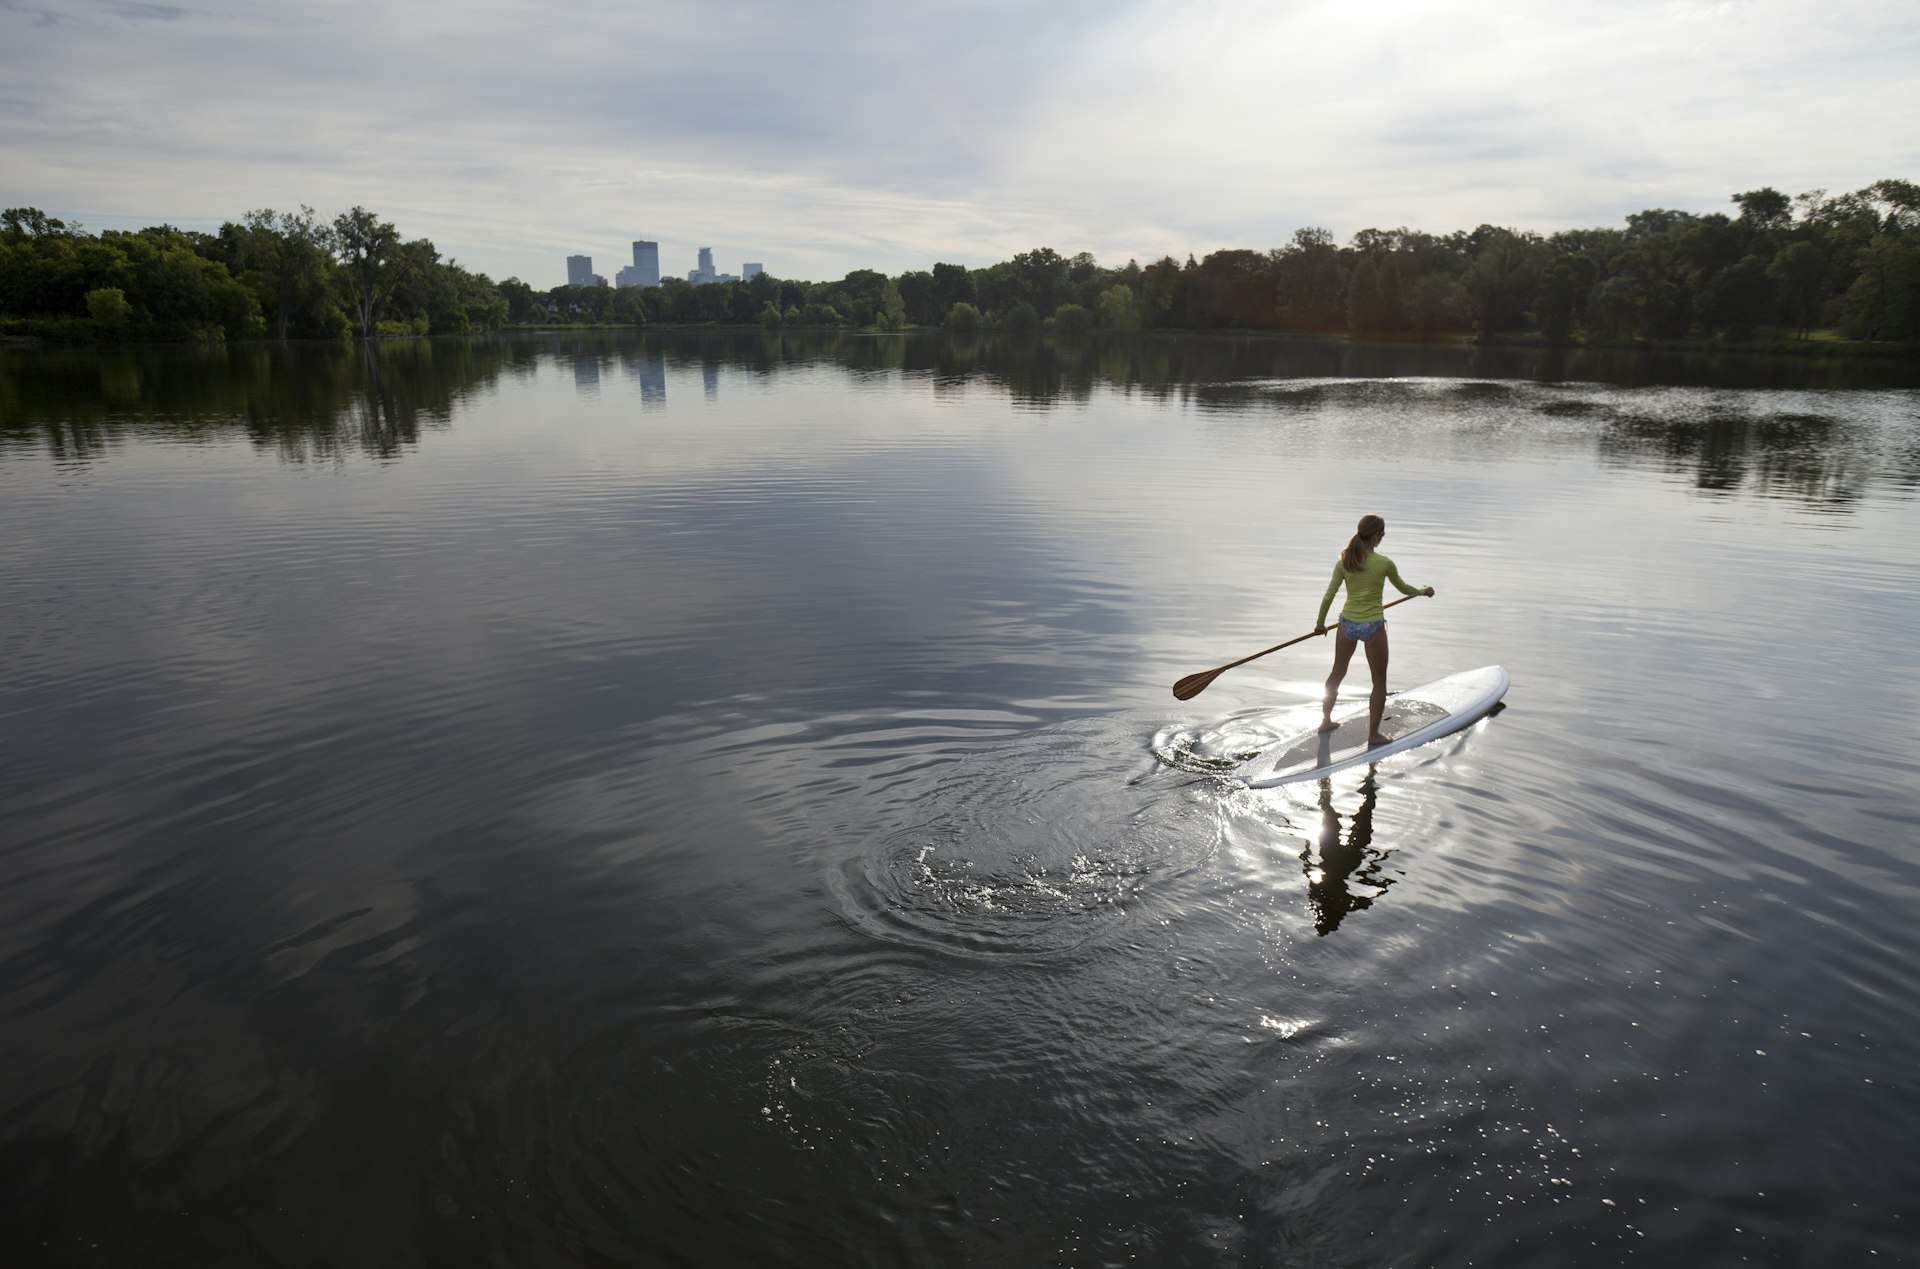 A woman stand-up paddleboarding on a Minneapolis lake